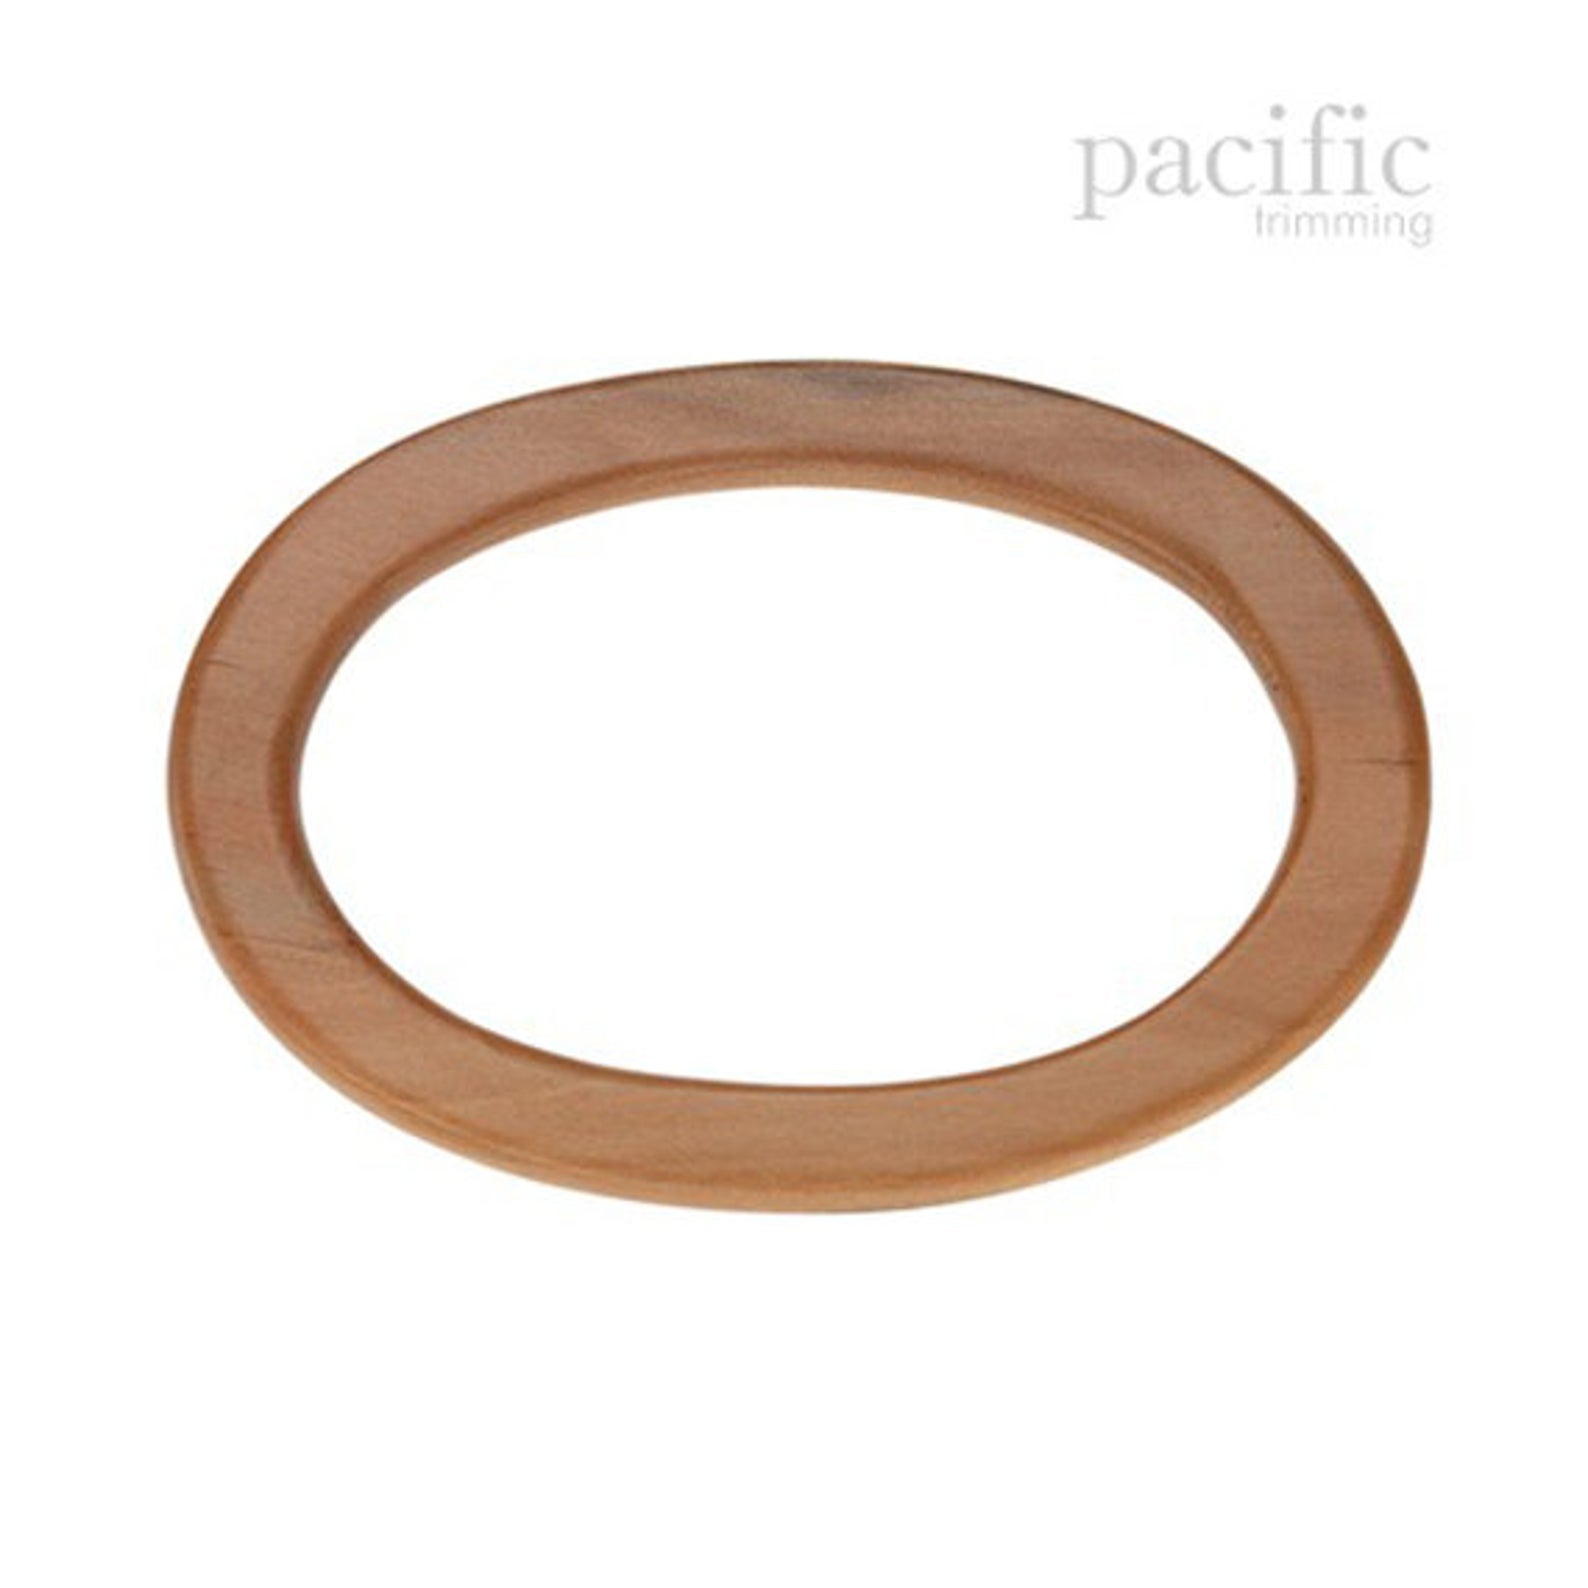 5.25 Inch Wooden Ring Bag Handle Brown